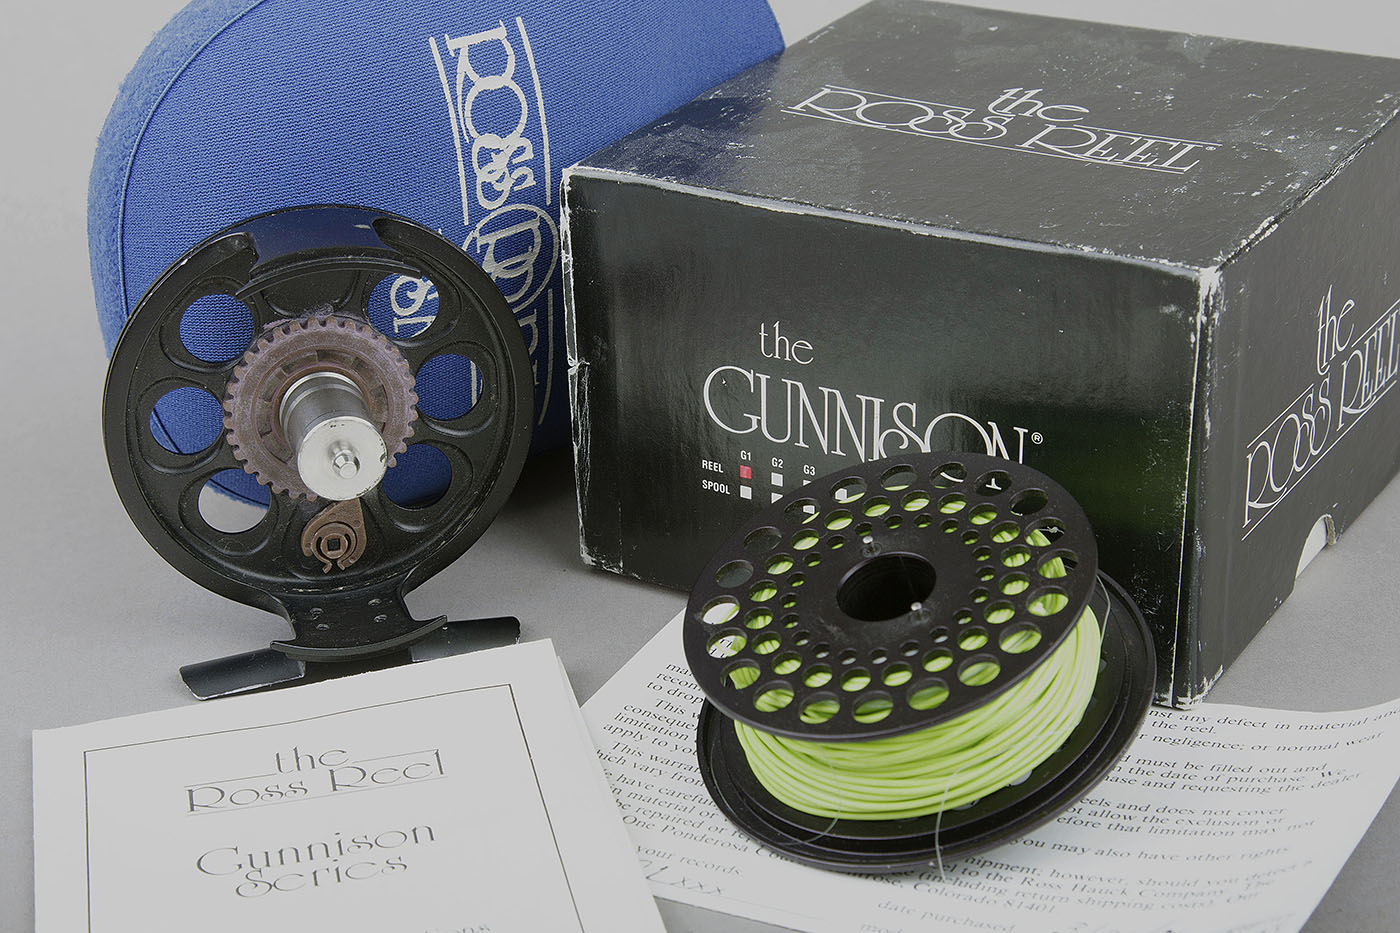 GUNNISON ROSS G1 Fly Fish Spool Used $210.75 - PicClick